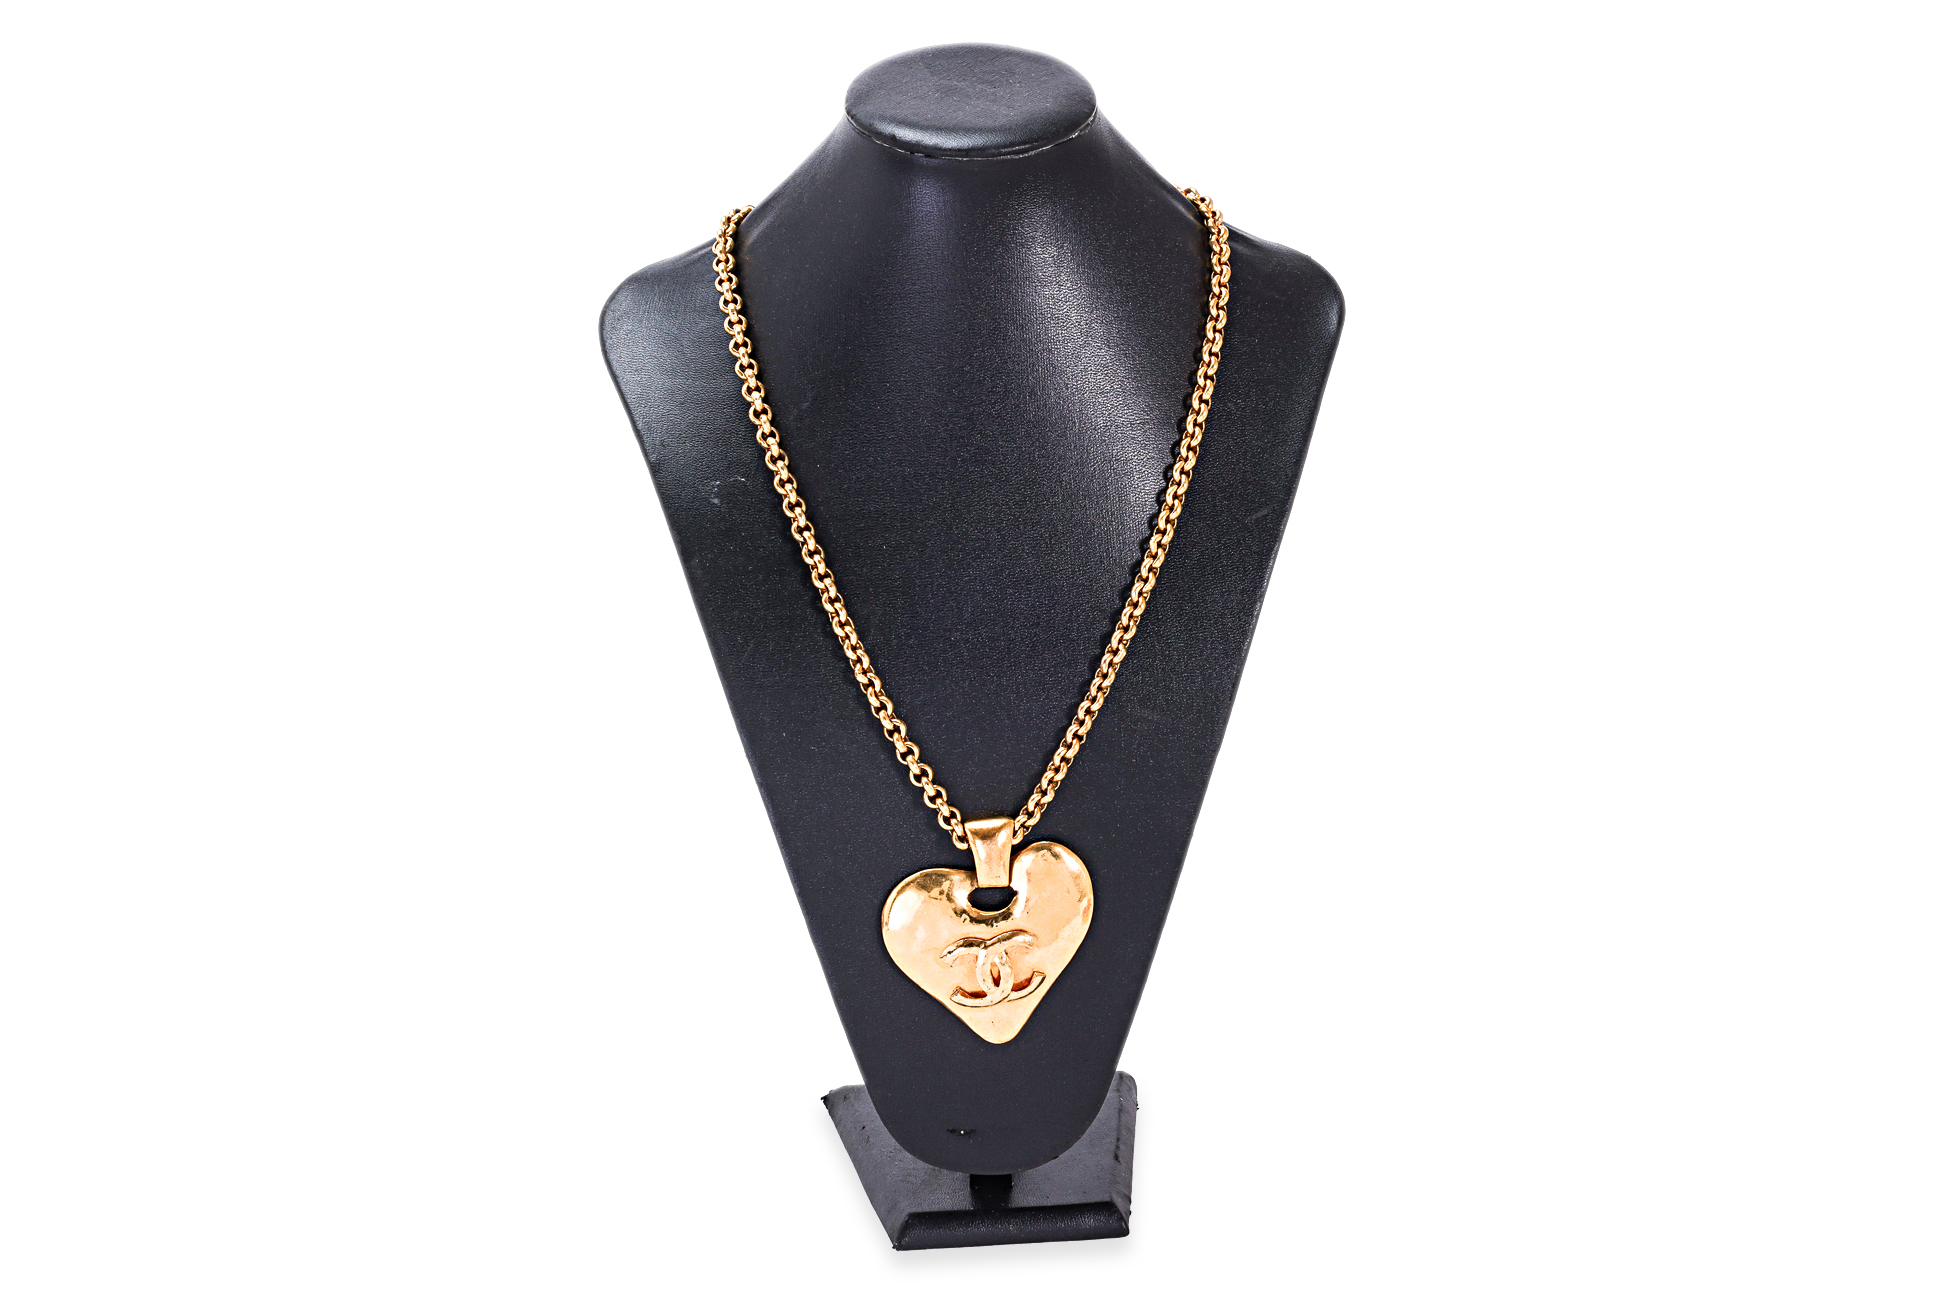 A CHANEL CC HEART PENDANT NECKLACE - Image 2 of 9